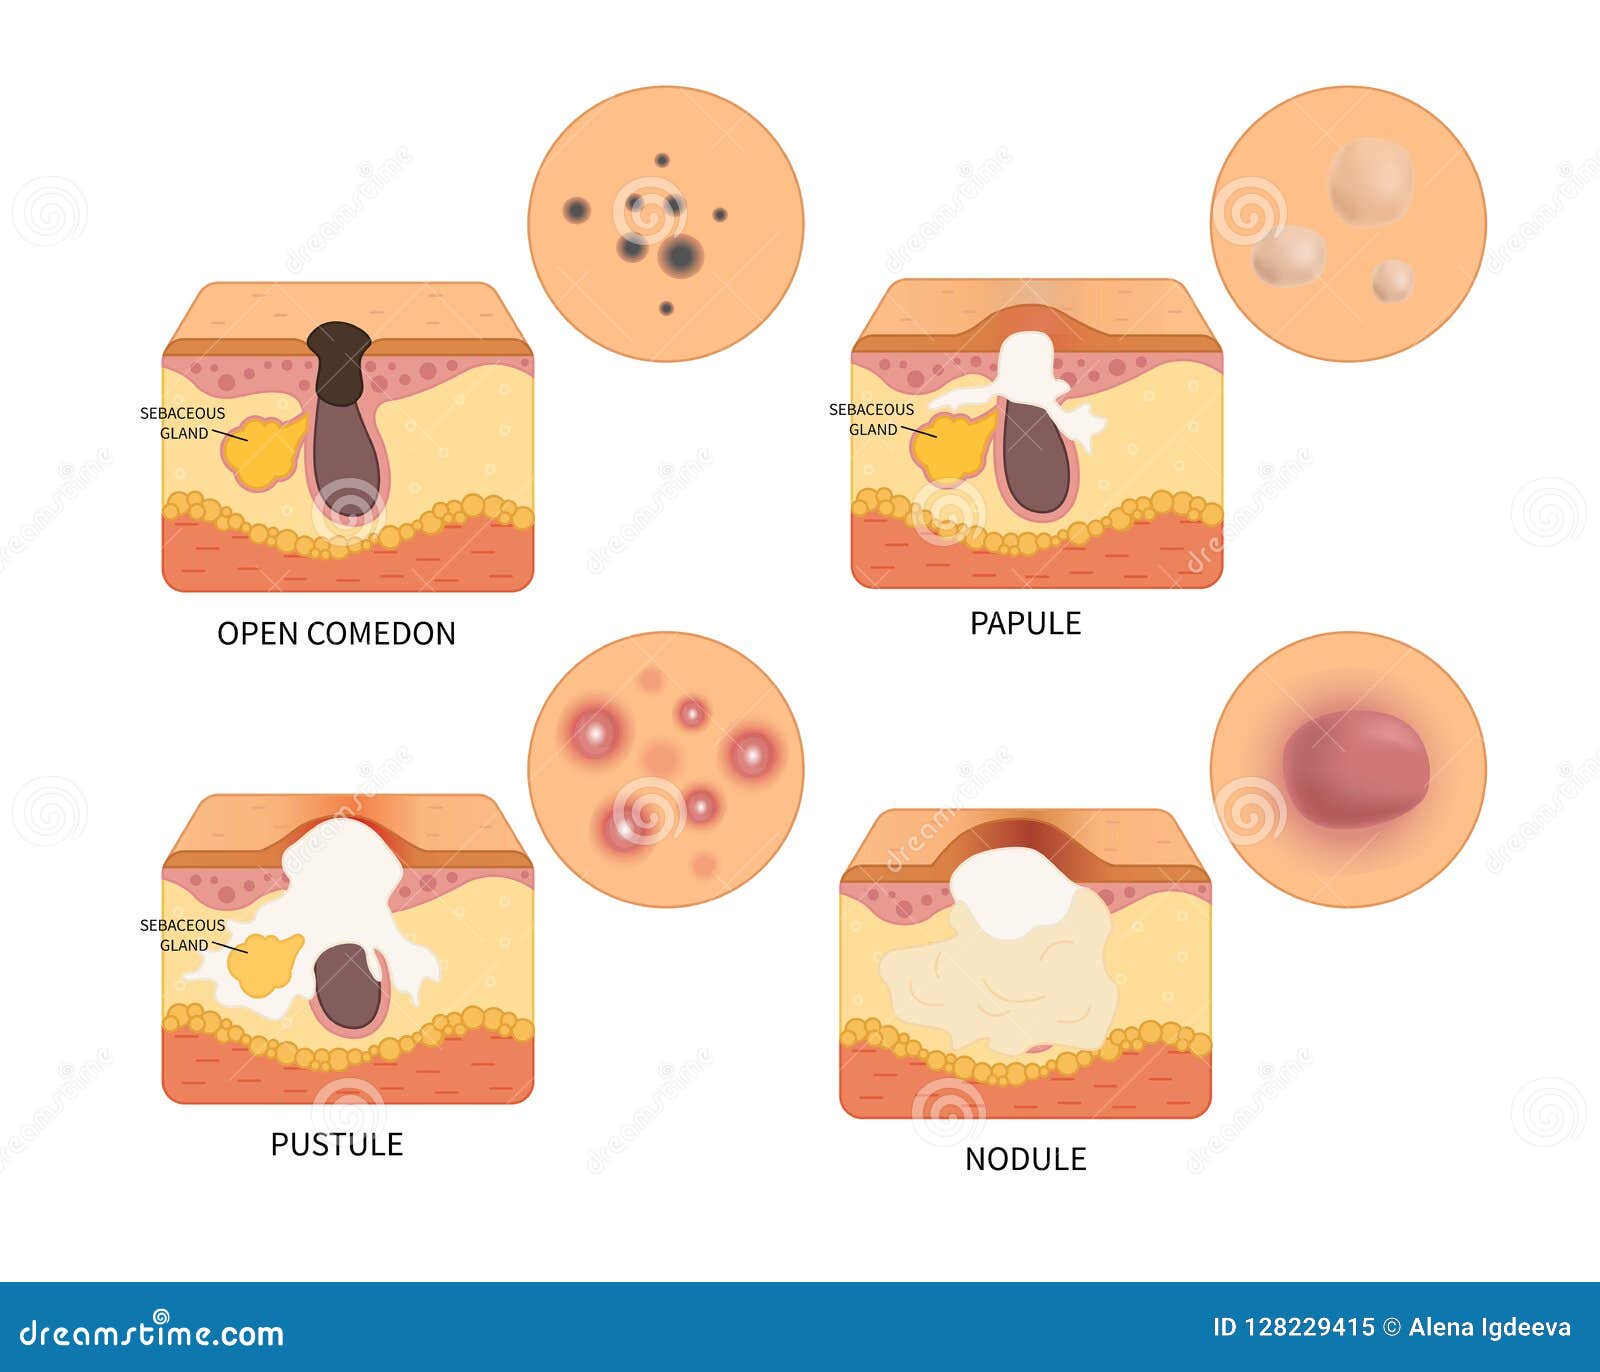  types of acne